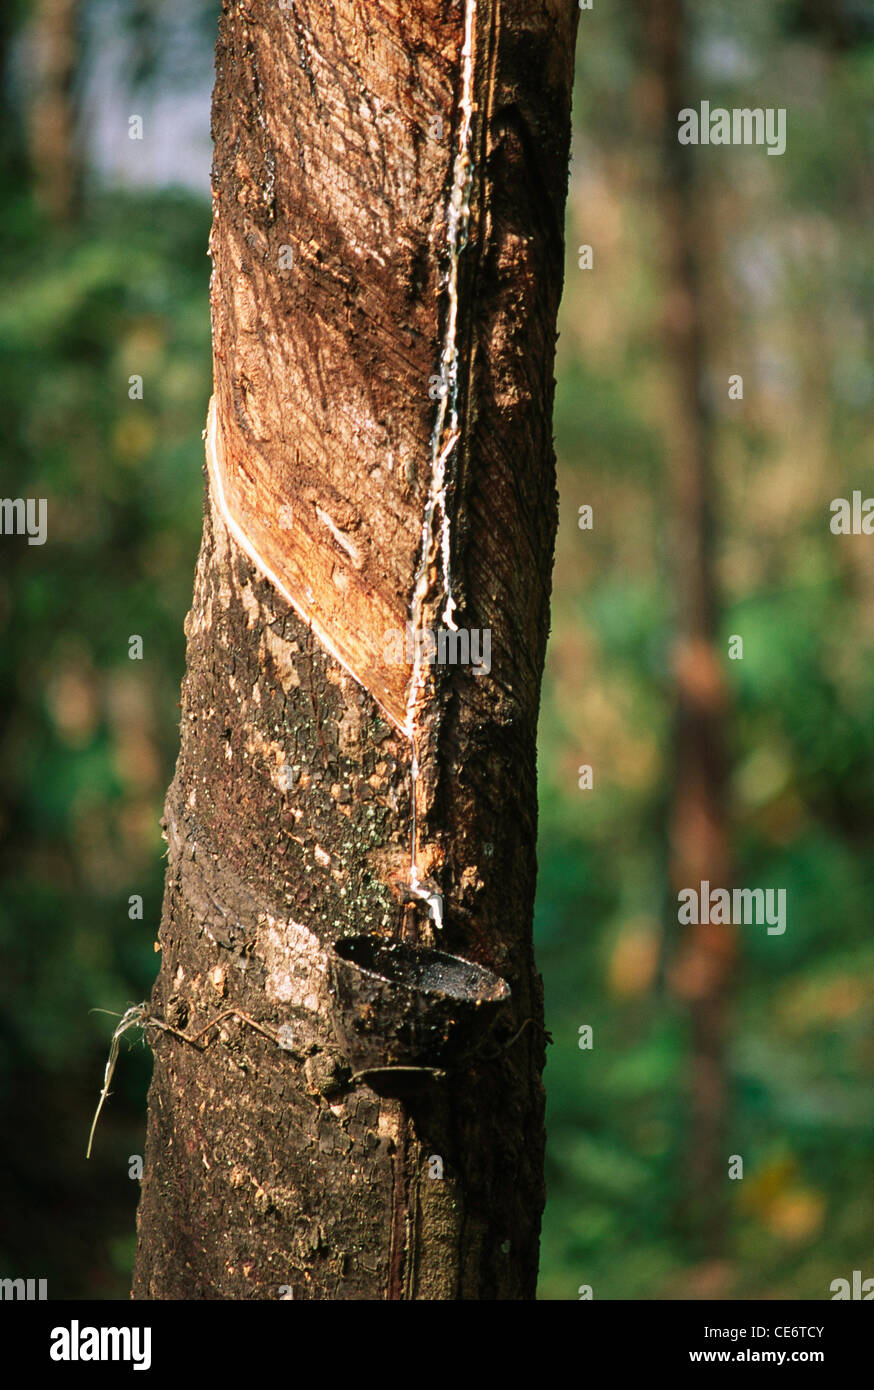 VPA 85853 : rubber tree with sap running into cup attached to the tree kerala india Stock Photo